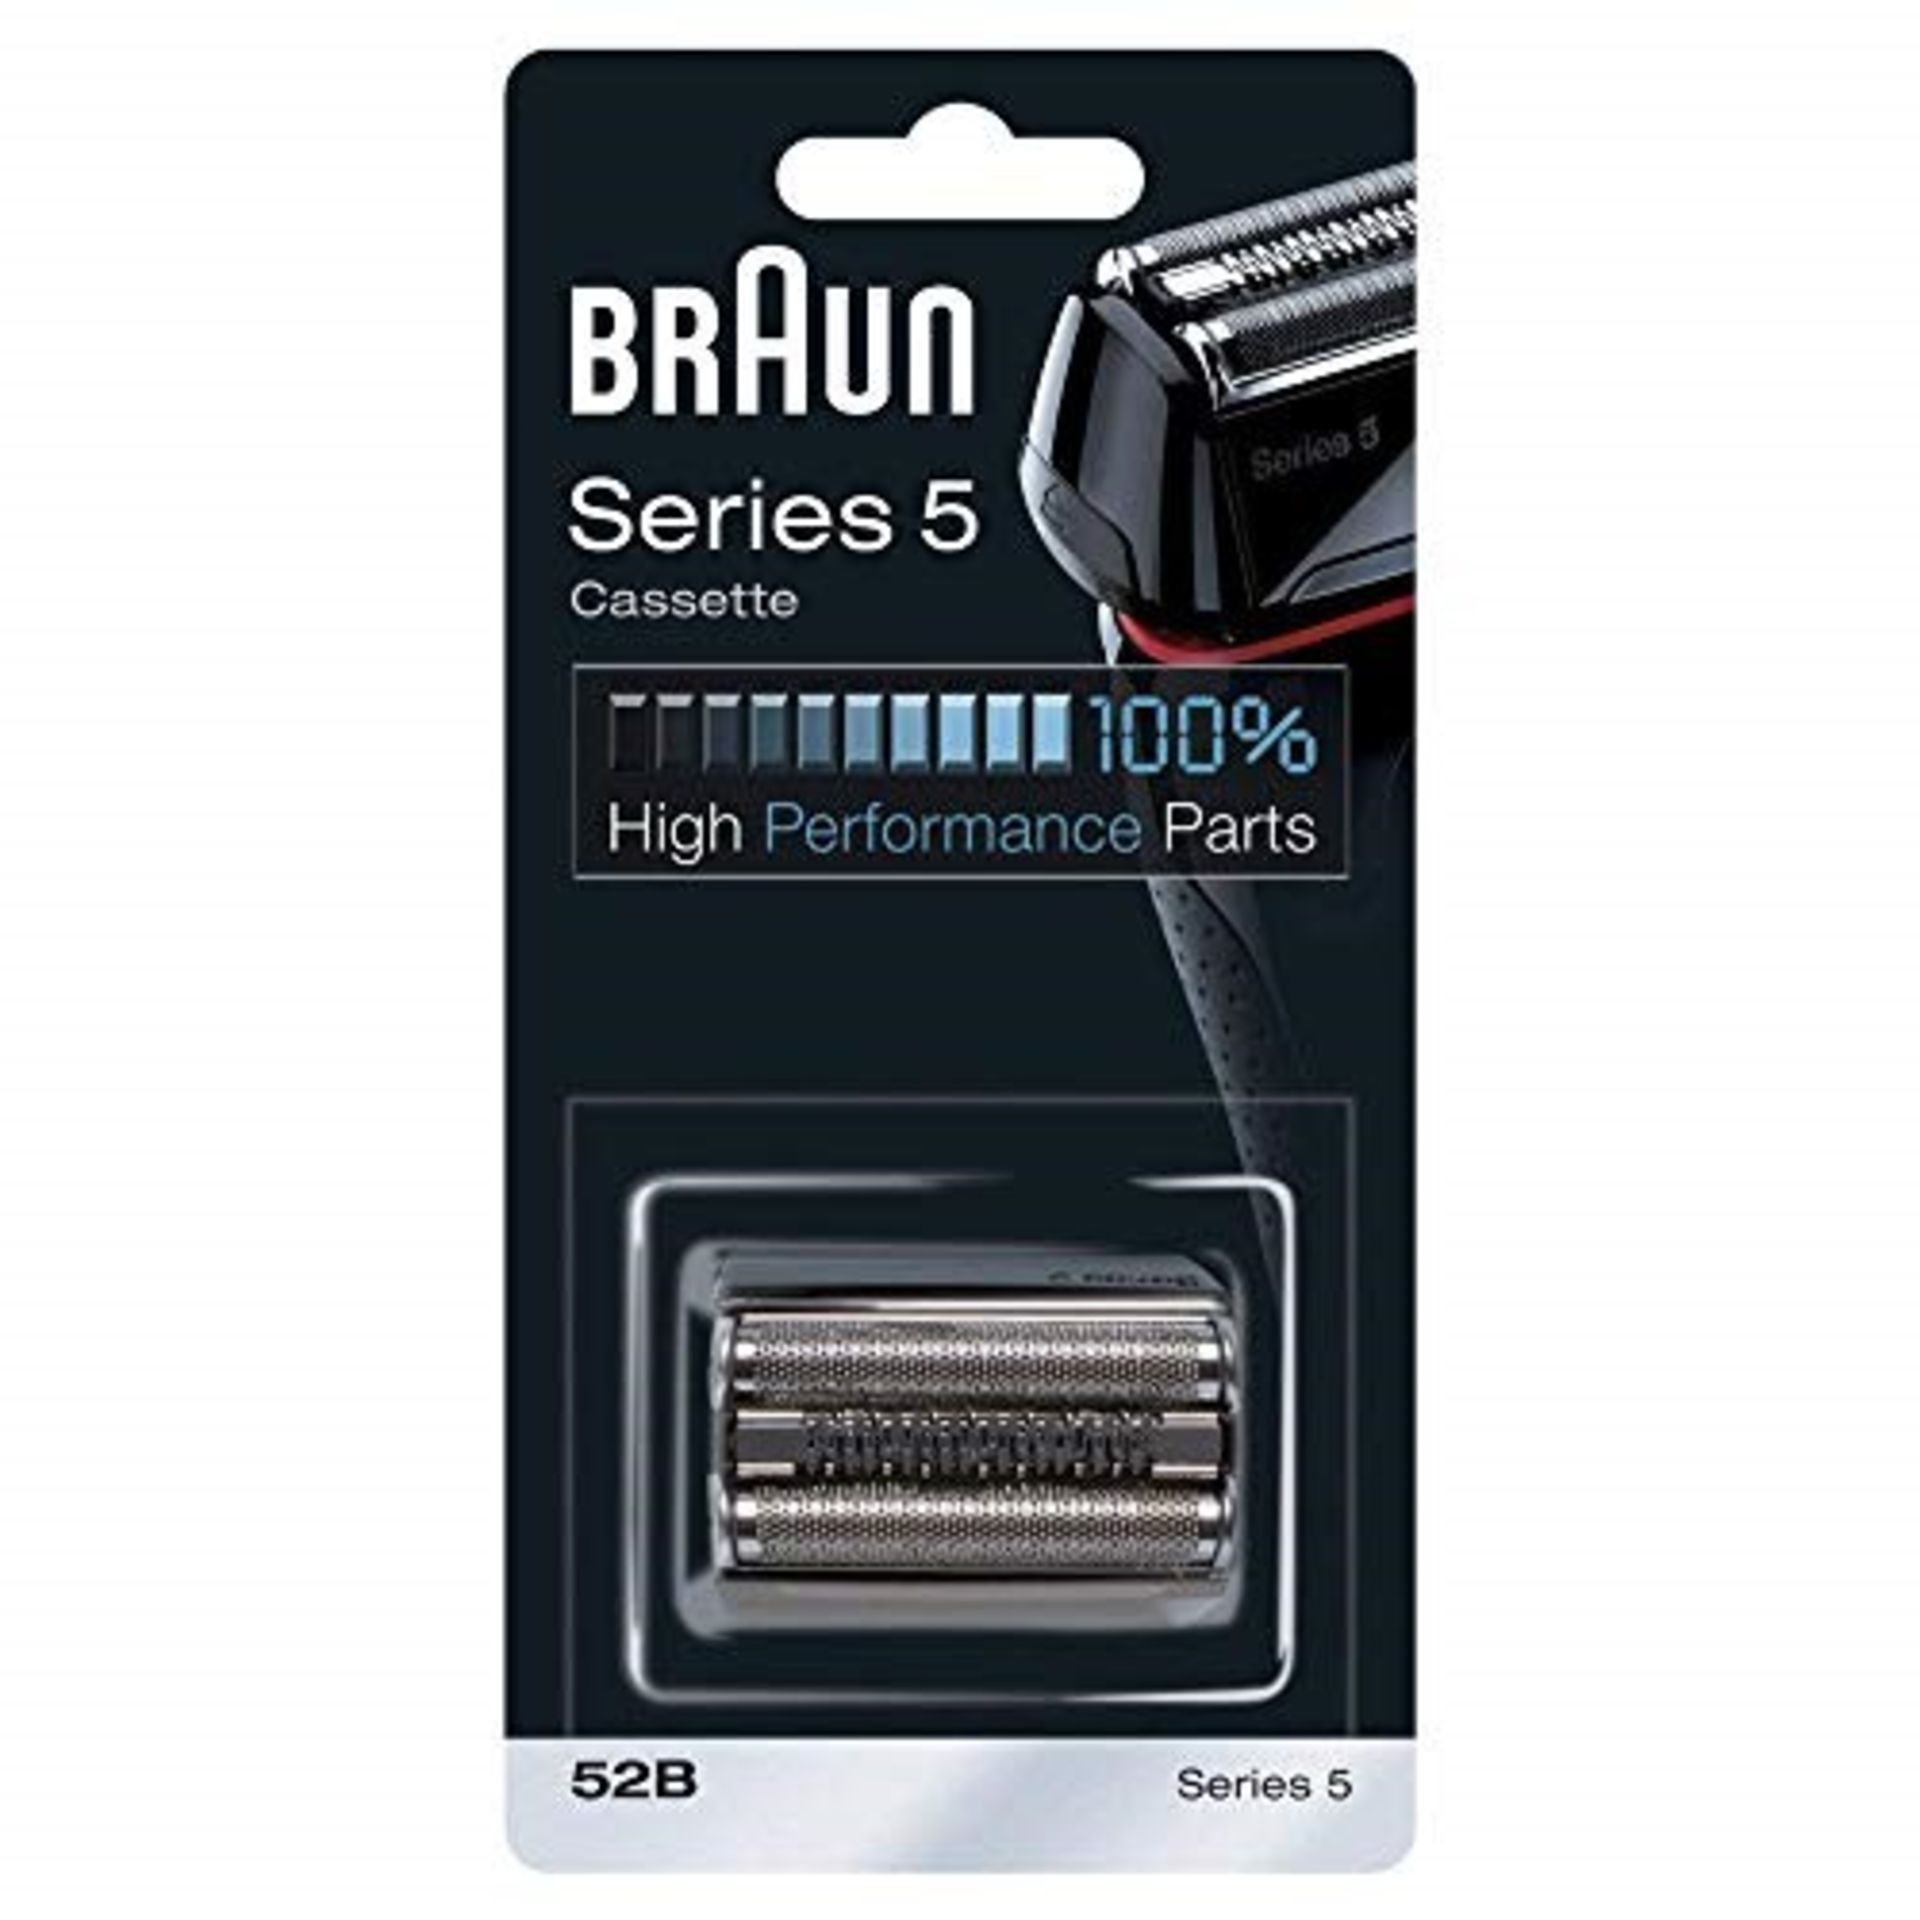 Braun Shaver Replacement Part 52B Black, Compatible with Series 5 Shavers